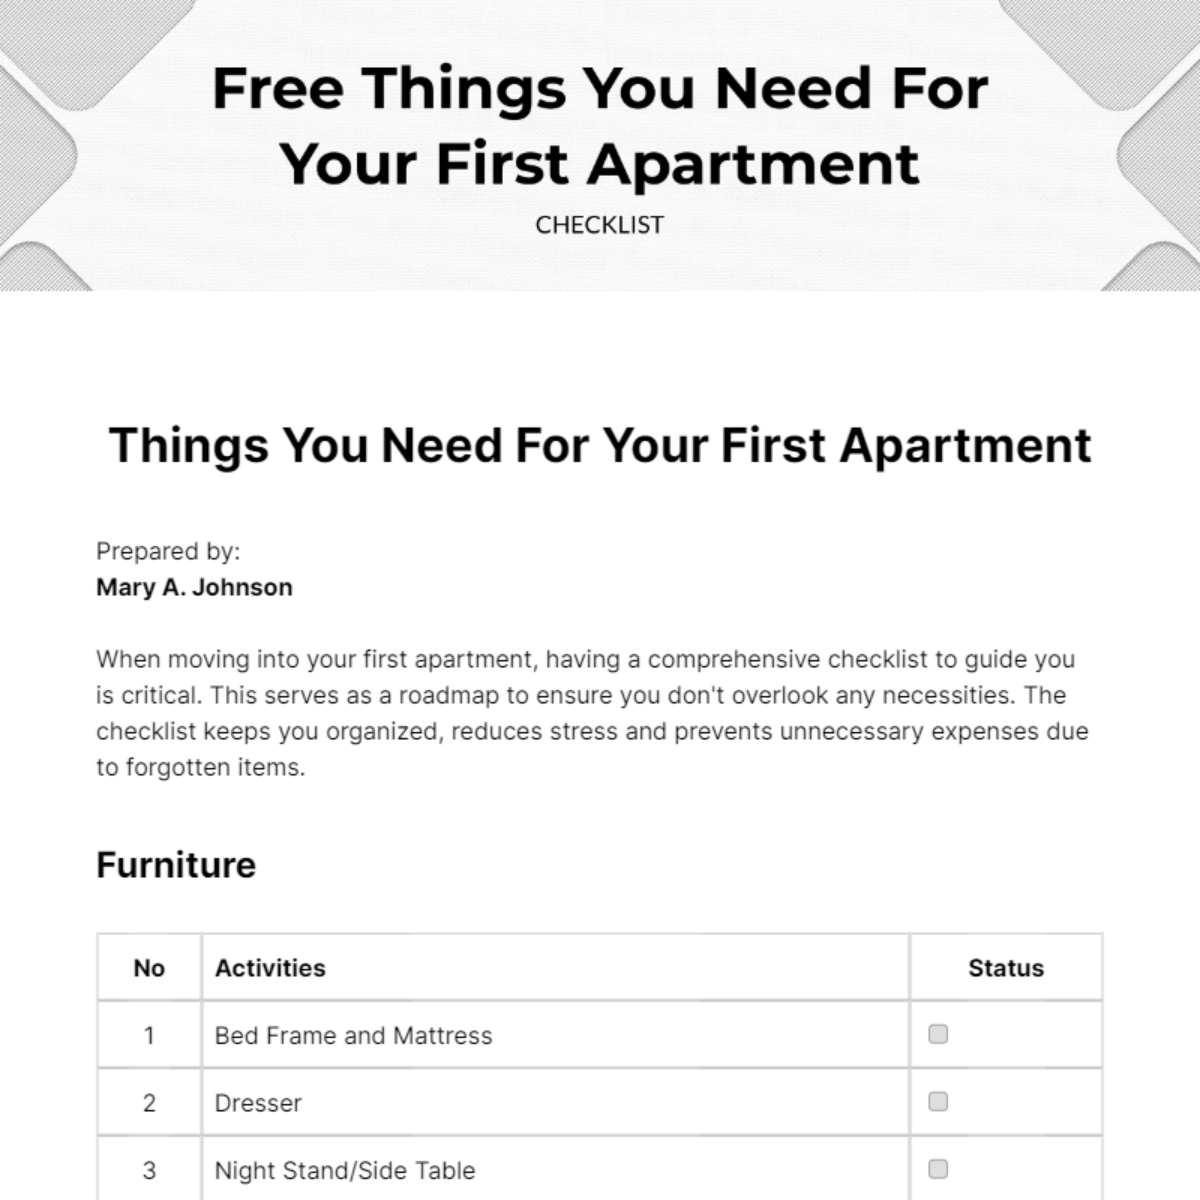 things-you-need-for-your-first-apartment-checklist